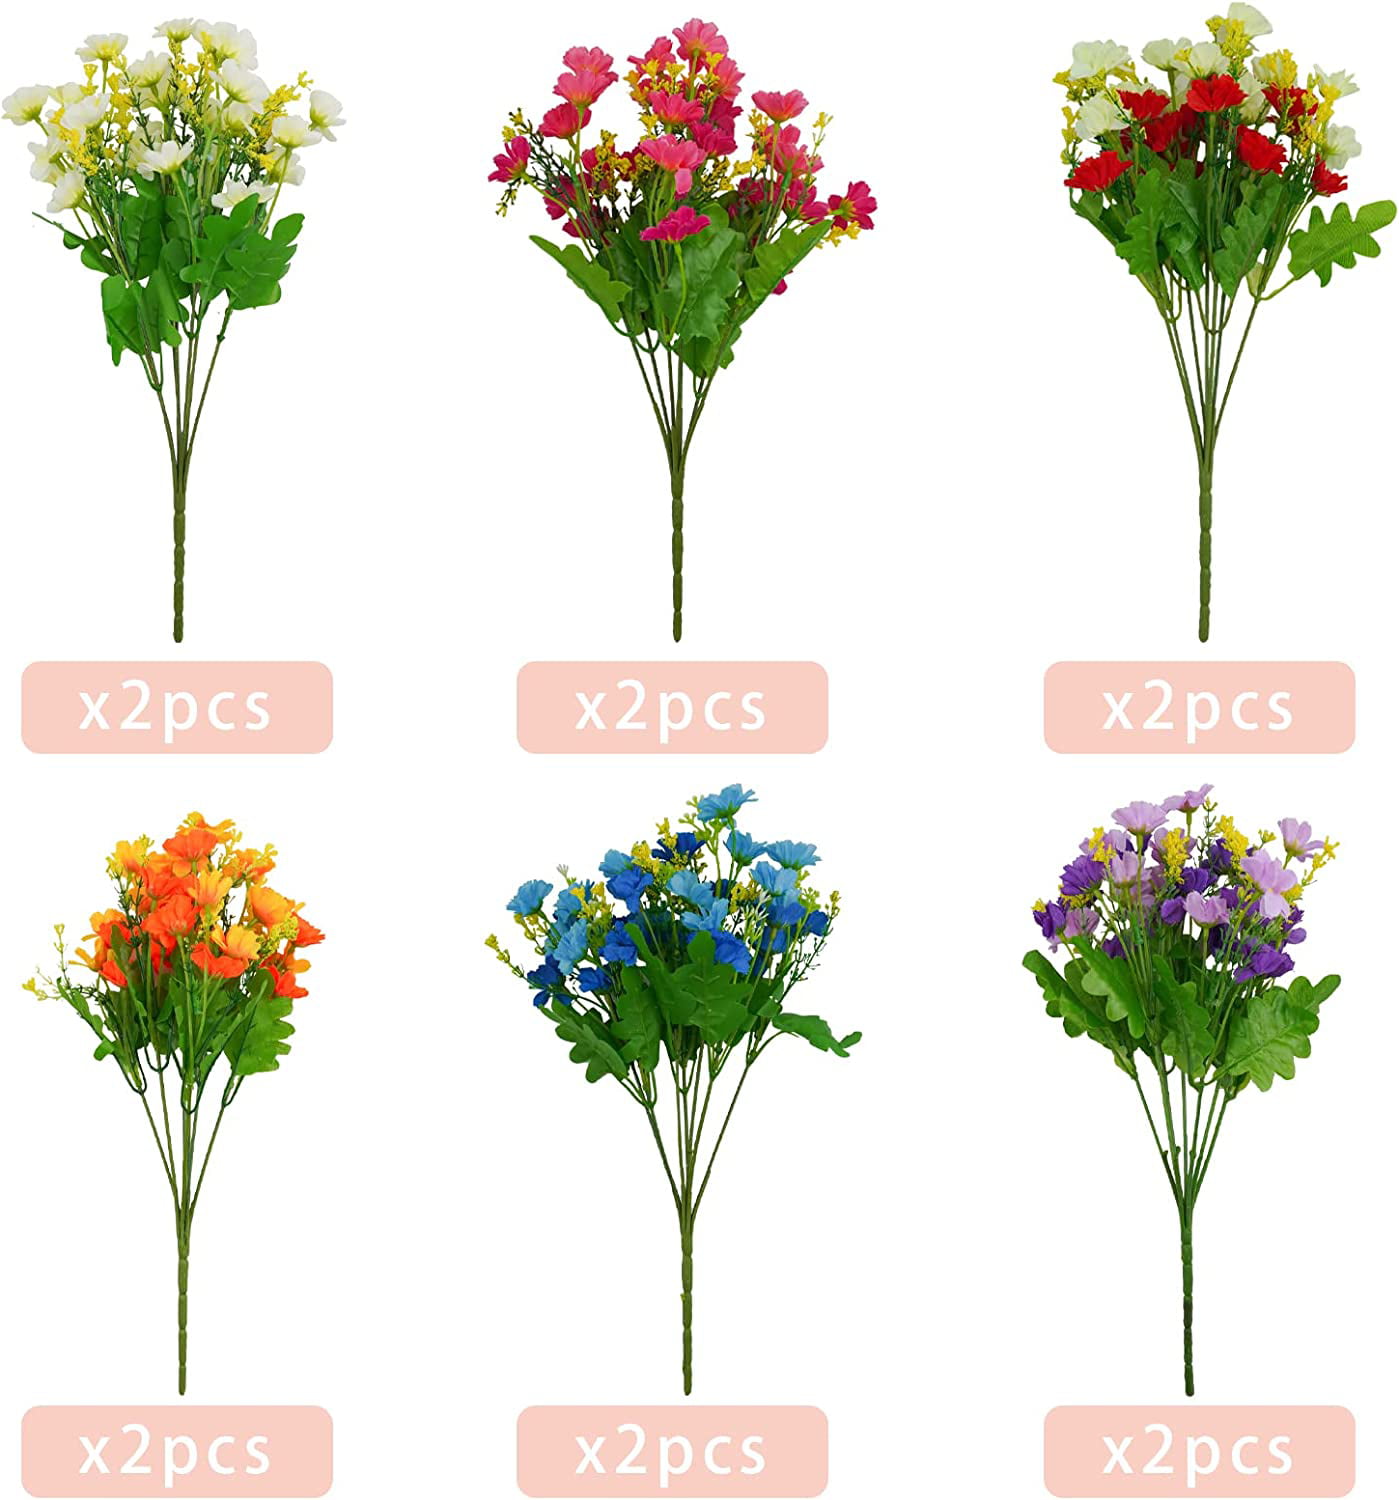 OUKEYI 12 Bundles Artificial Flowers Artificial Daisy Flowers UV Resistant  Outdoor Fake Wildflowers with Stems Faux Greenery Shrubs Plants